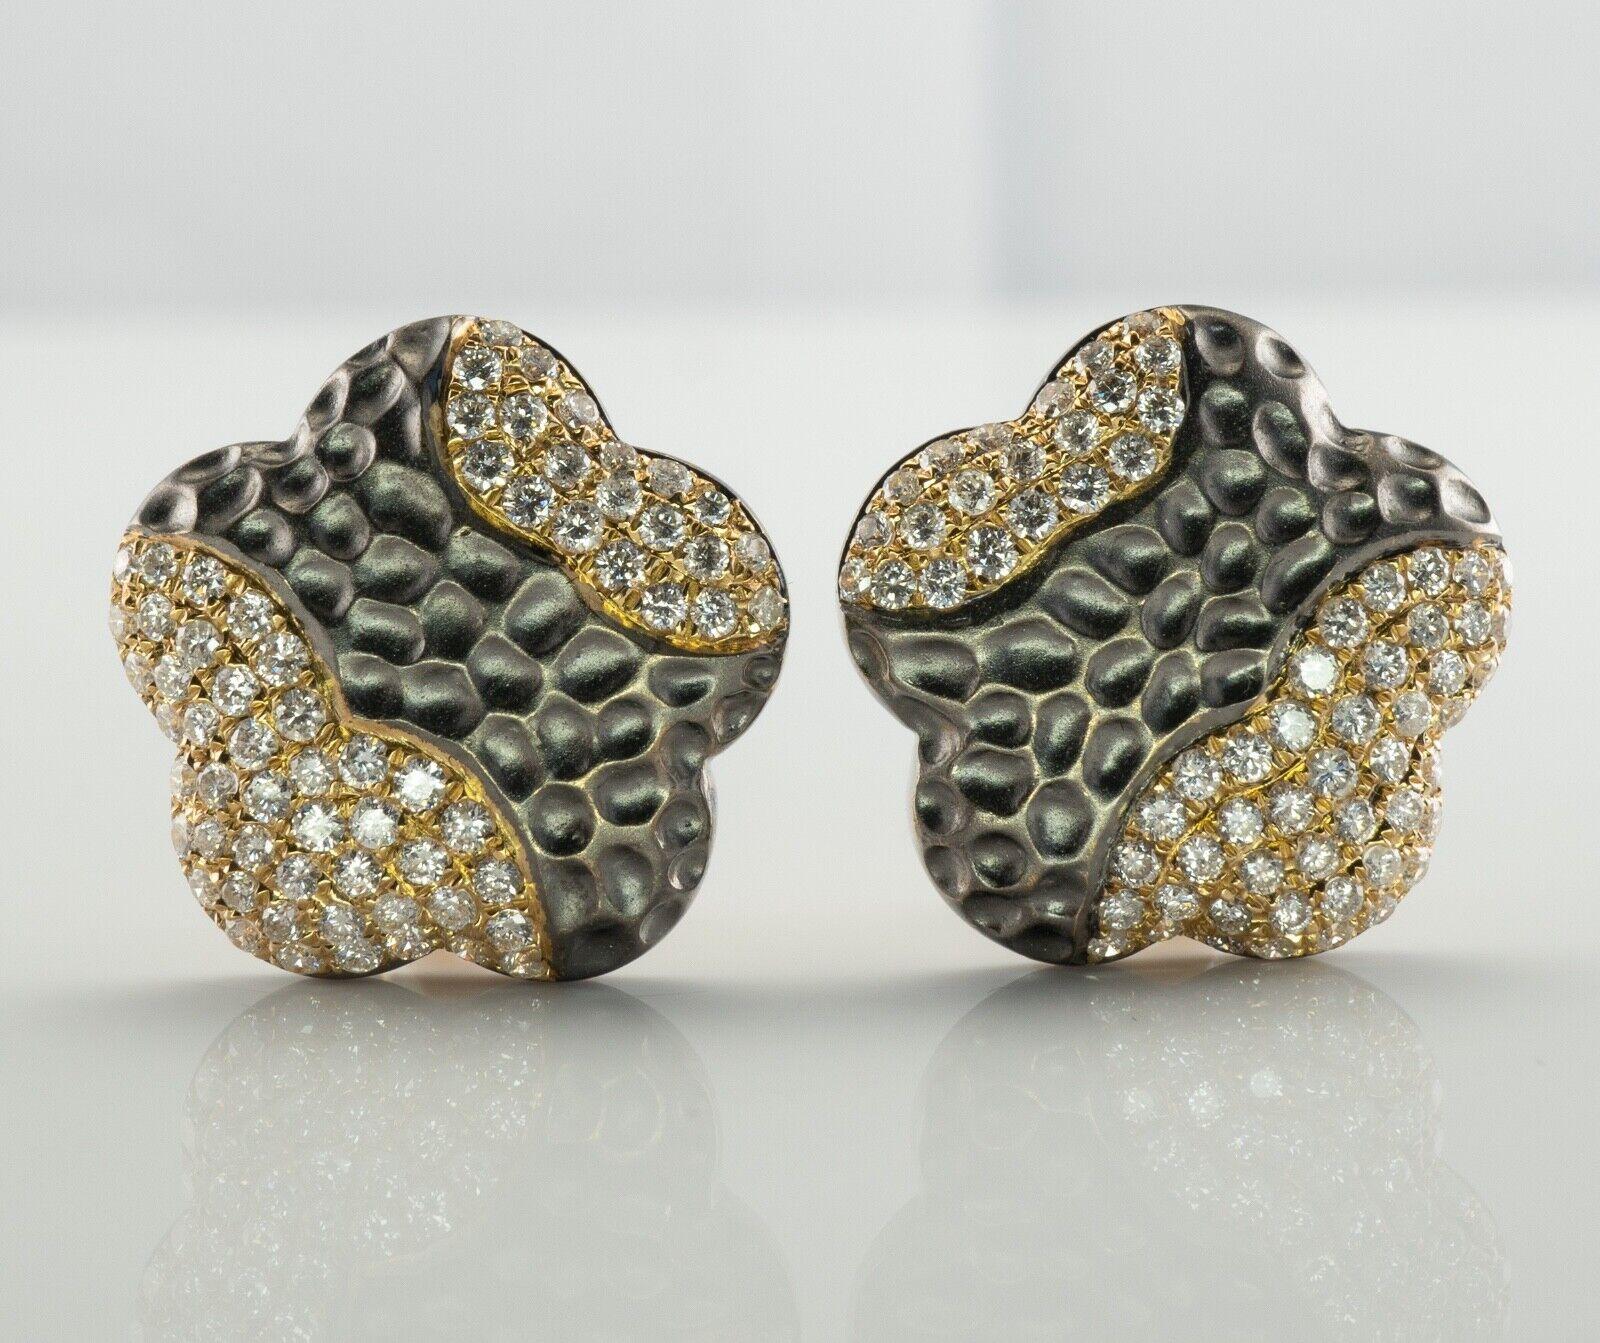 Diamond Earrings 18K Gold Hallmarked BA Flower Omega

This gorgeous pair of estate earrings is finely crafted in solid 18K Yellow gold and blackened gold. There are 68 round brilliant cut diamonds in each earrings. These gems are very clean VS2